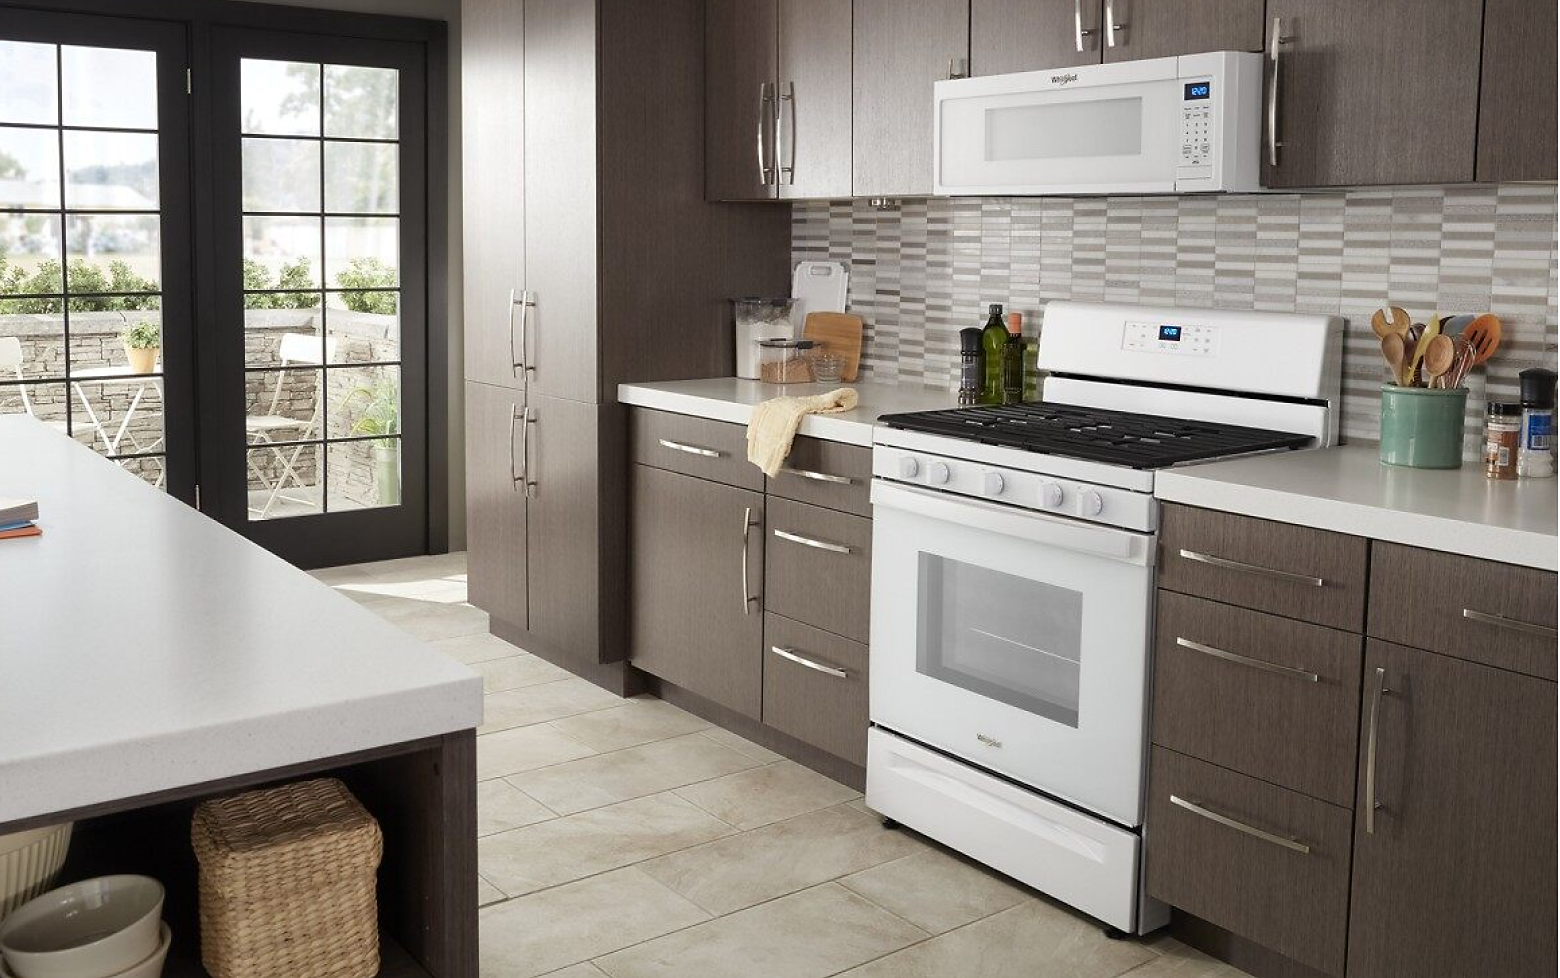 Kitchen featuring Whirlpool® range and microwave in white